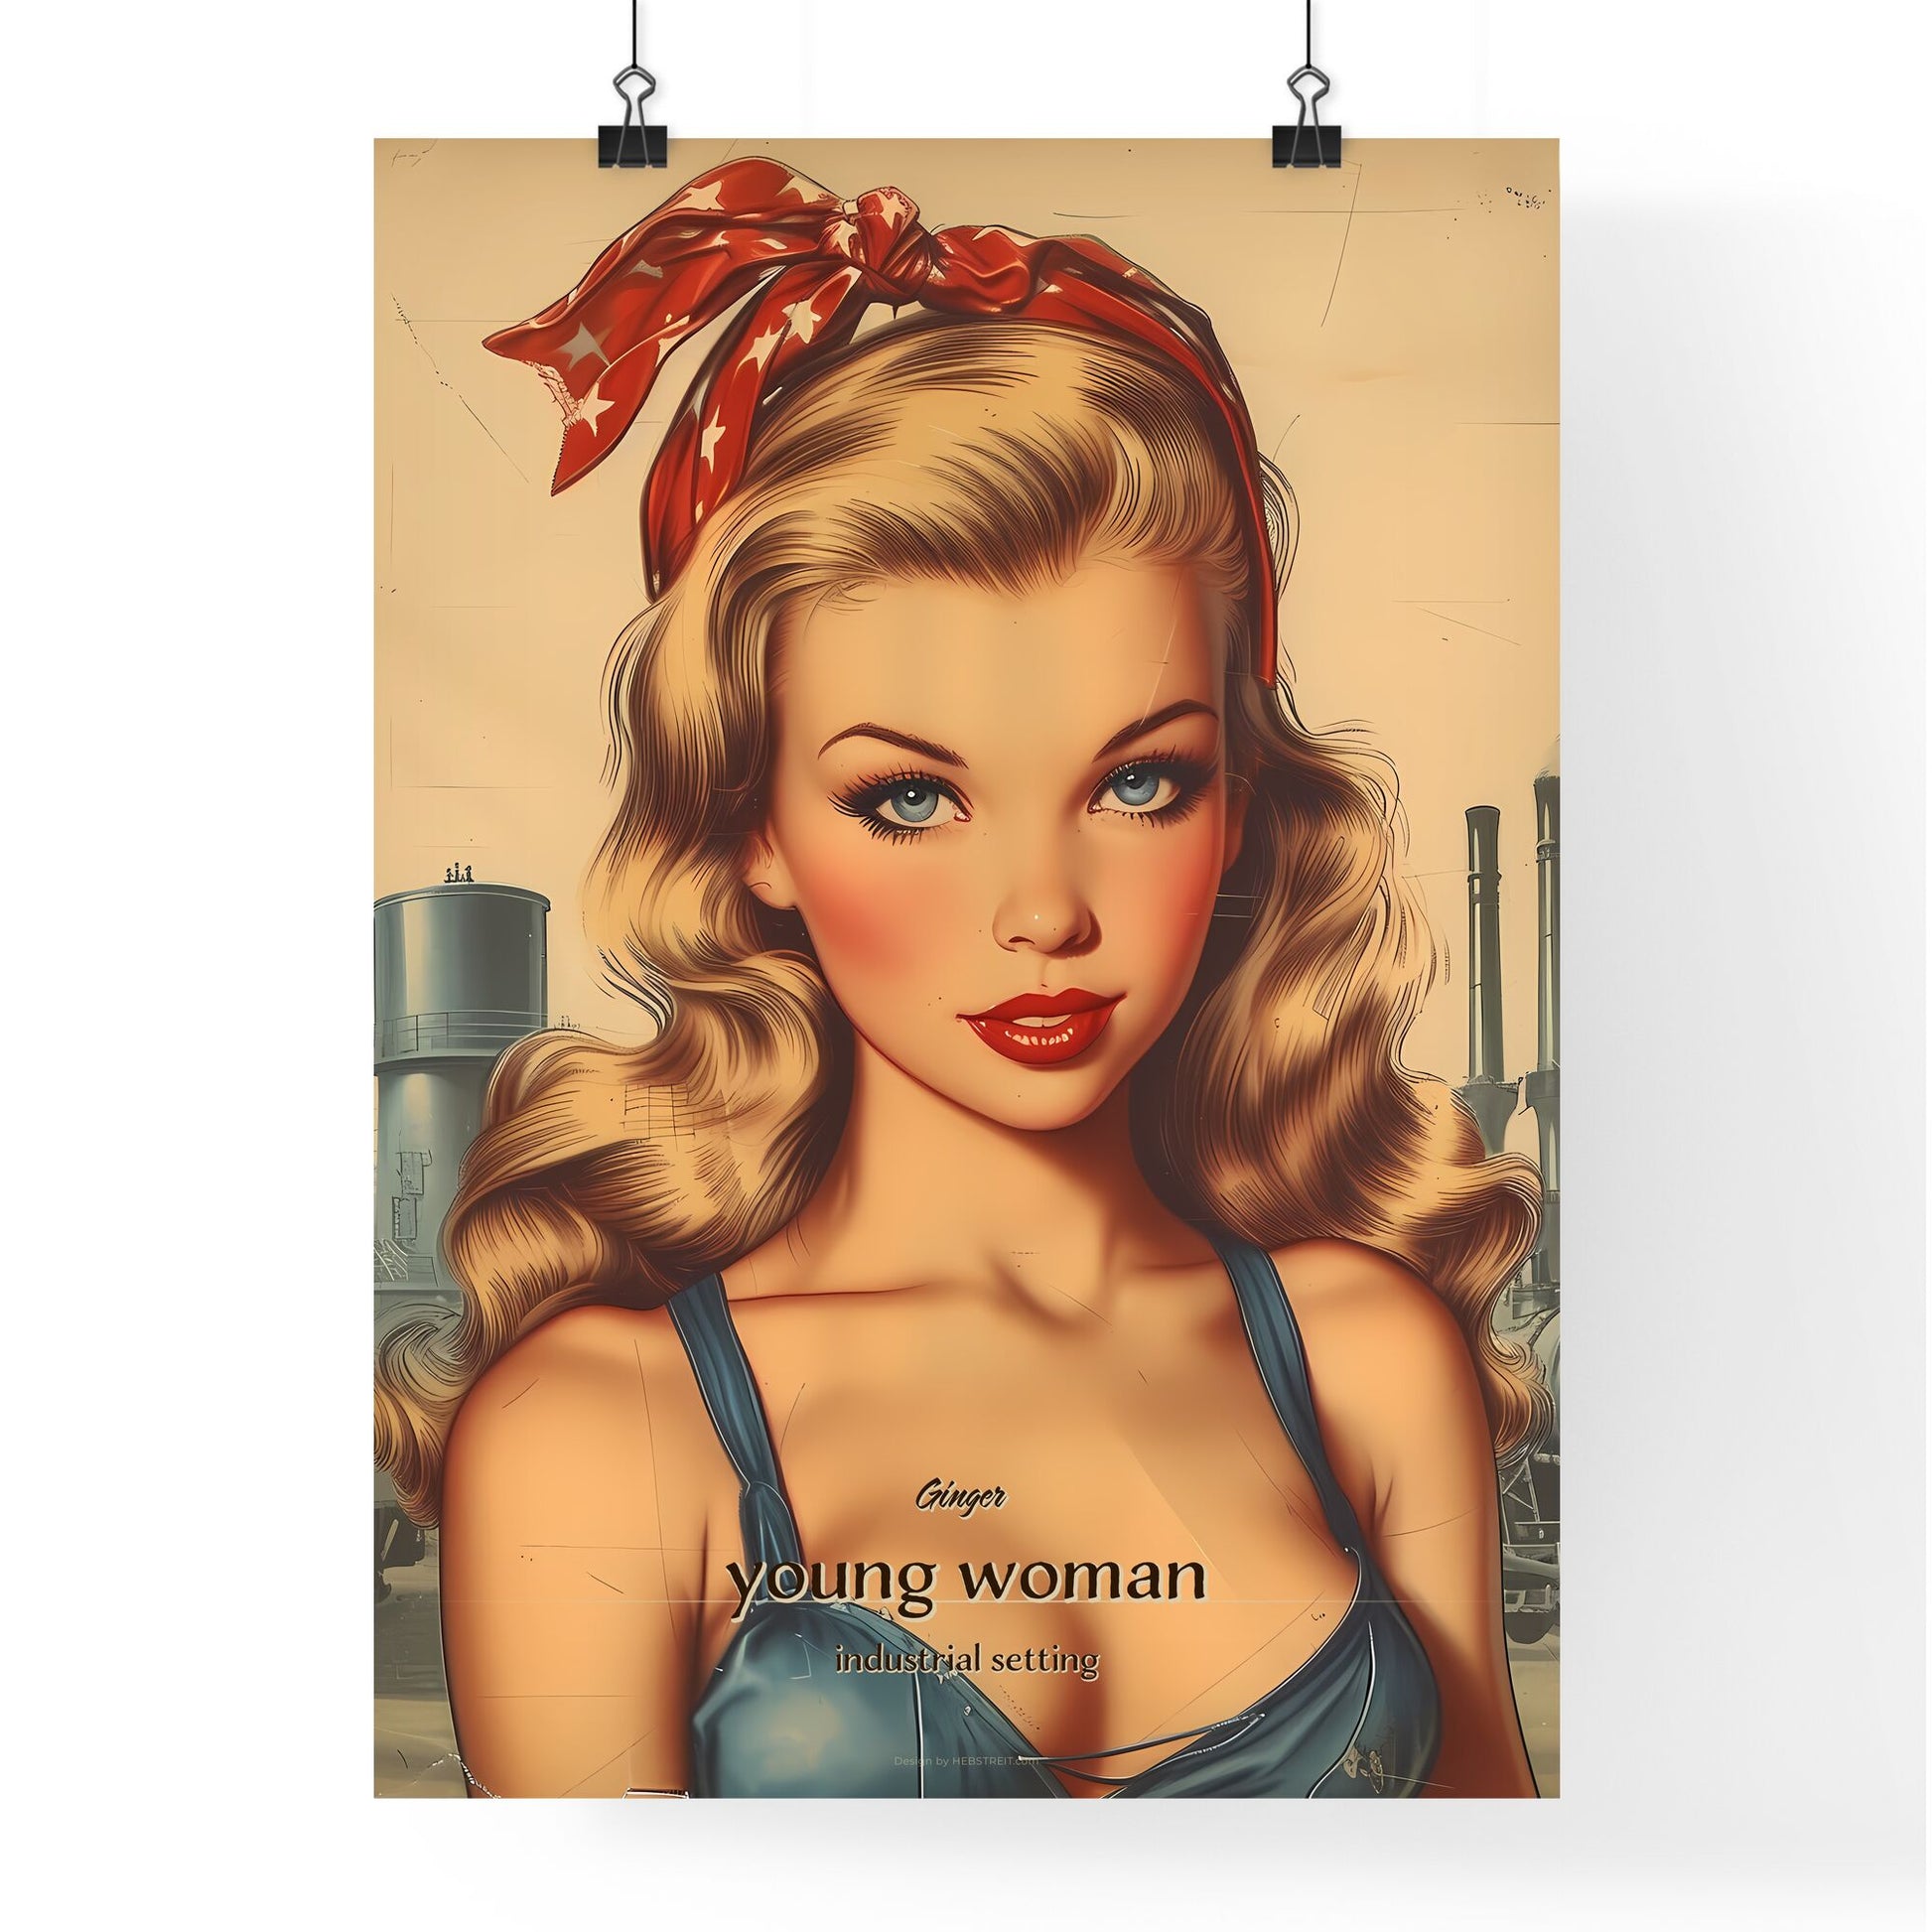 Ginger, young woman, industrial setting, A Poster of a woman with a red bow on her head Default Title